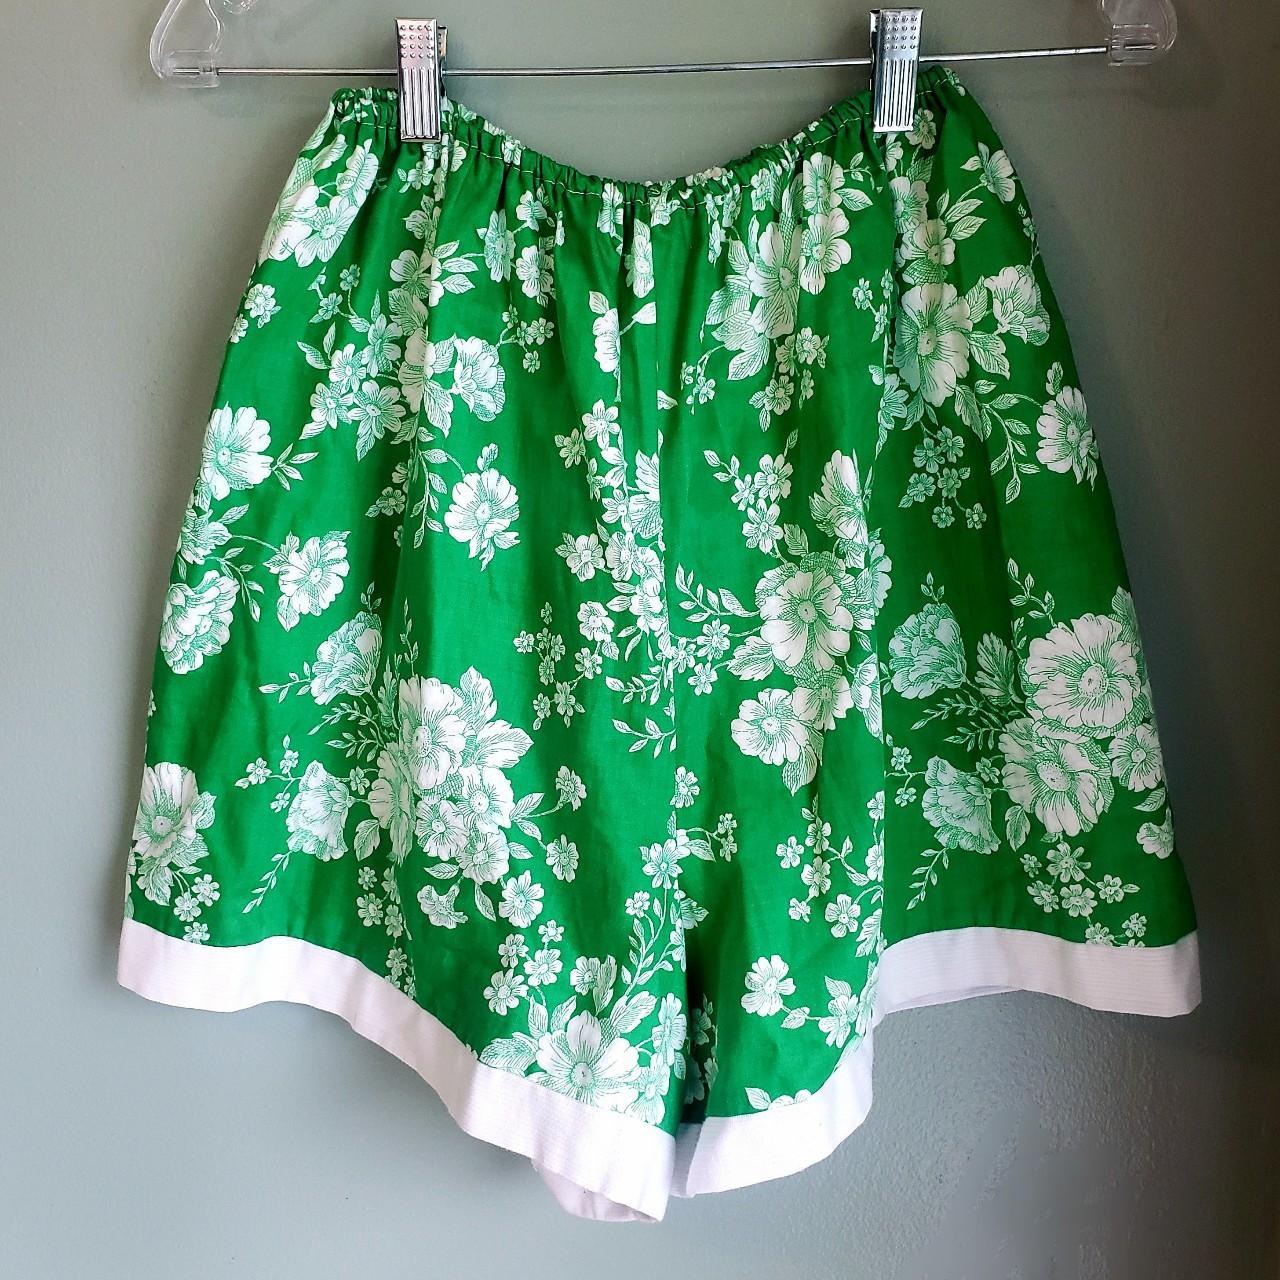 American Vintage Women's Green and White Suit (4)